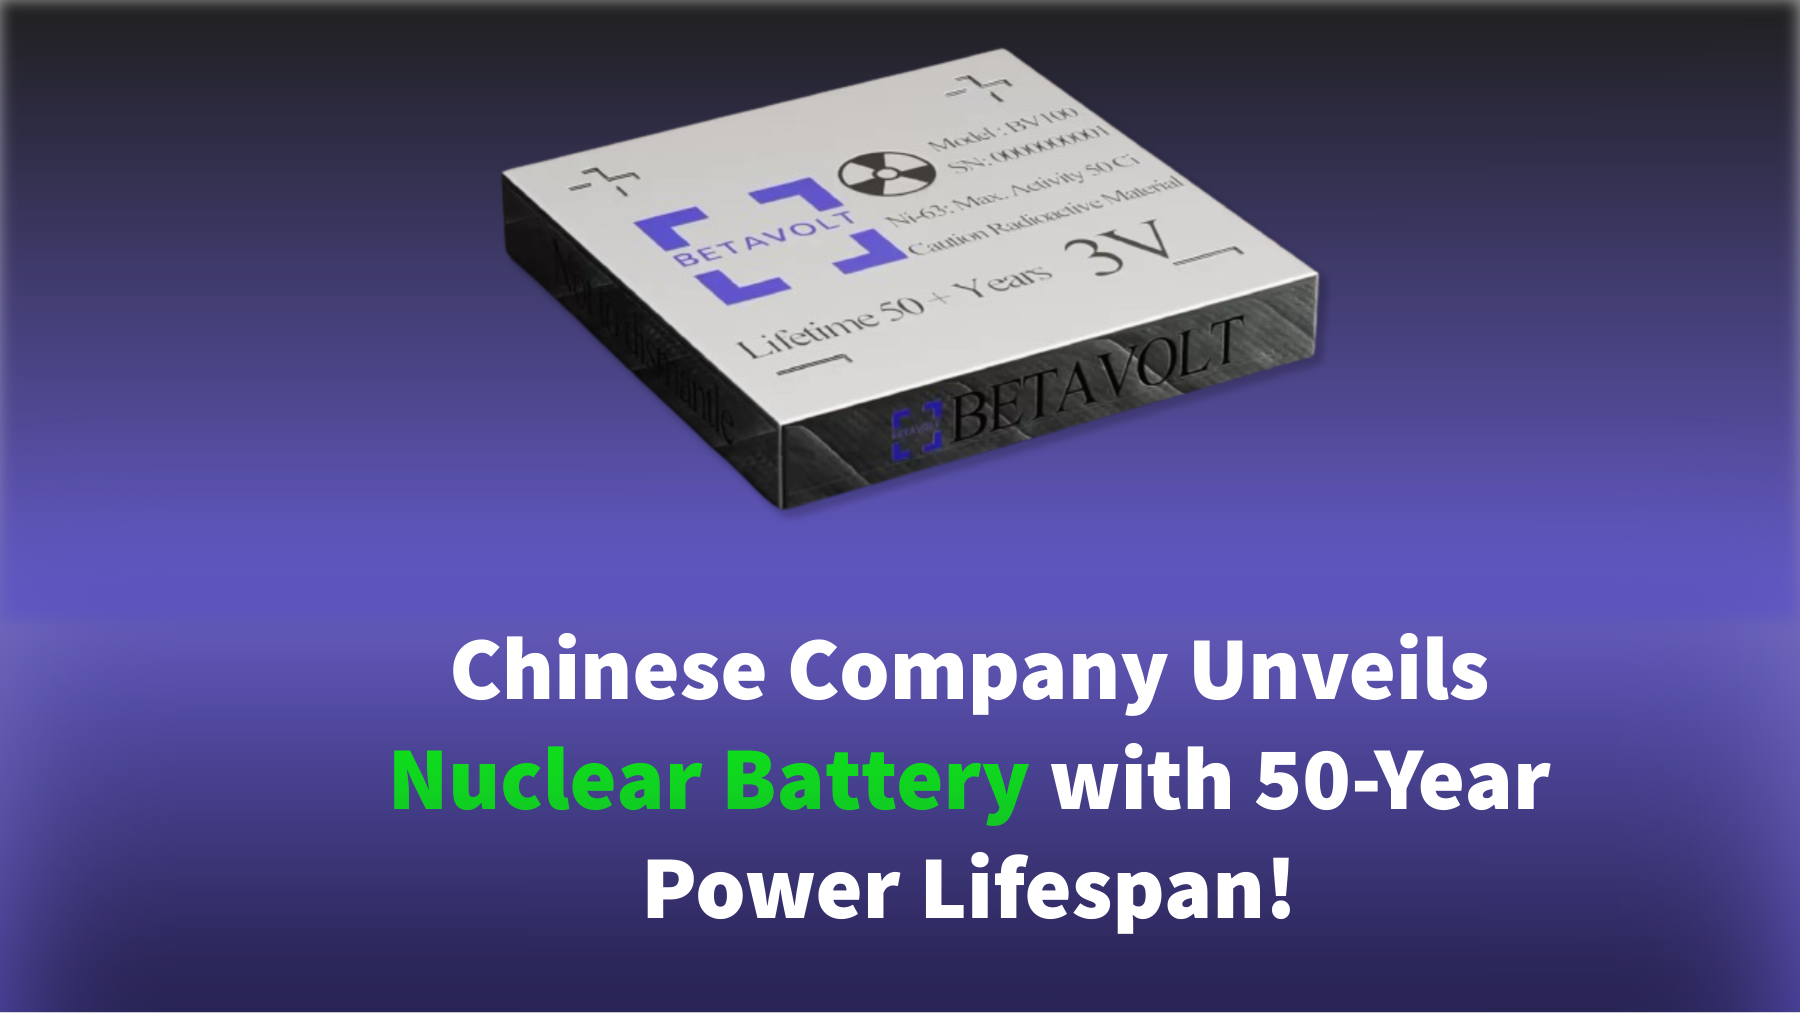 Chinese Firm developed Nuclear Battery